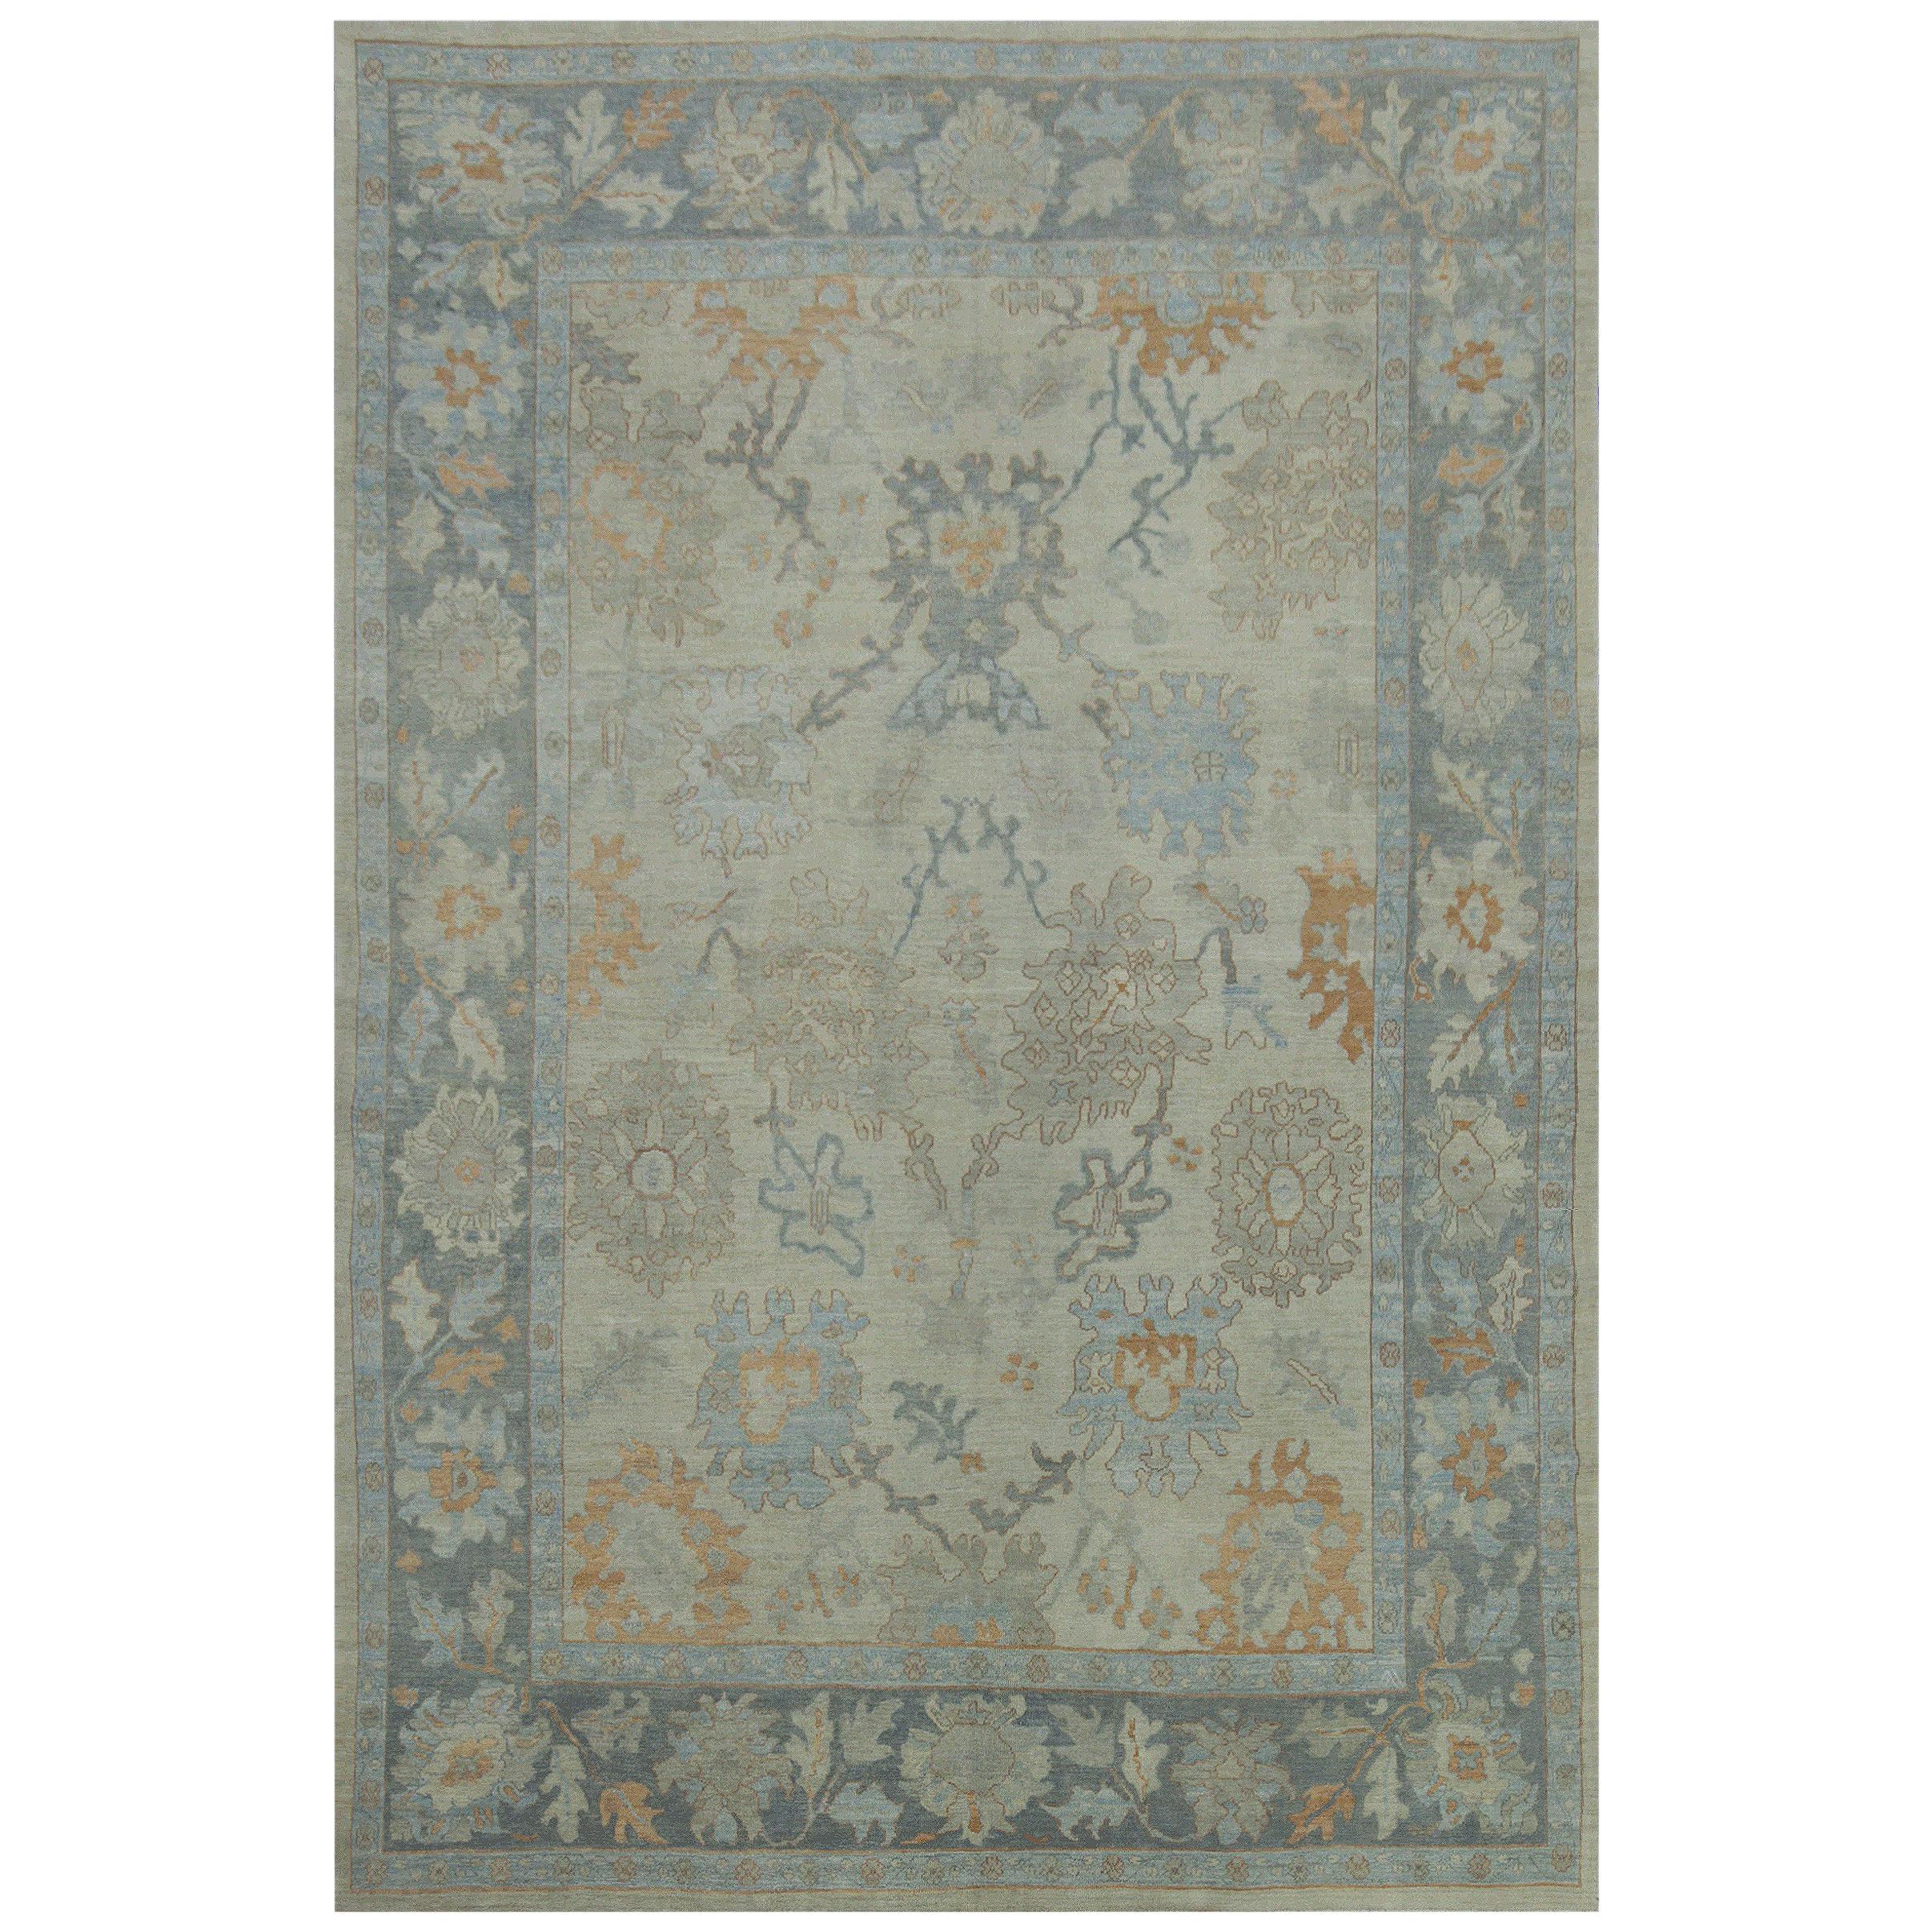 Modern Turkish Oushak Rug with Beige Field and Blue Border with Floral Details